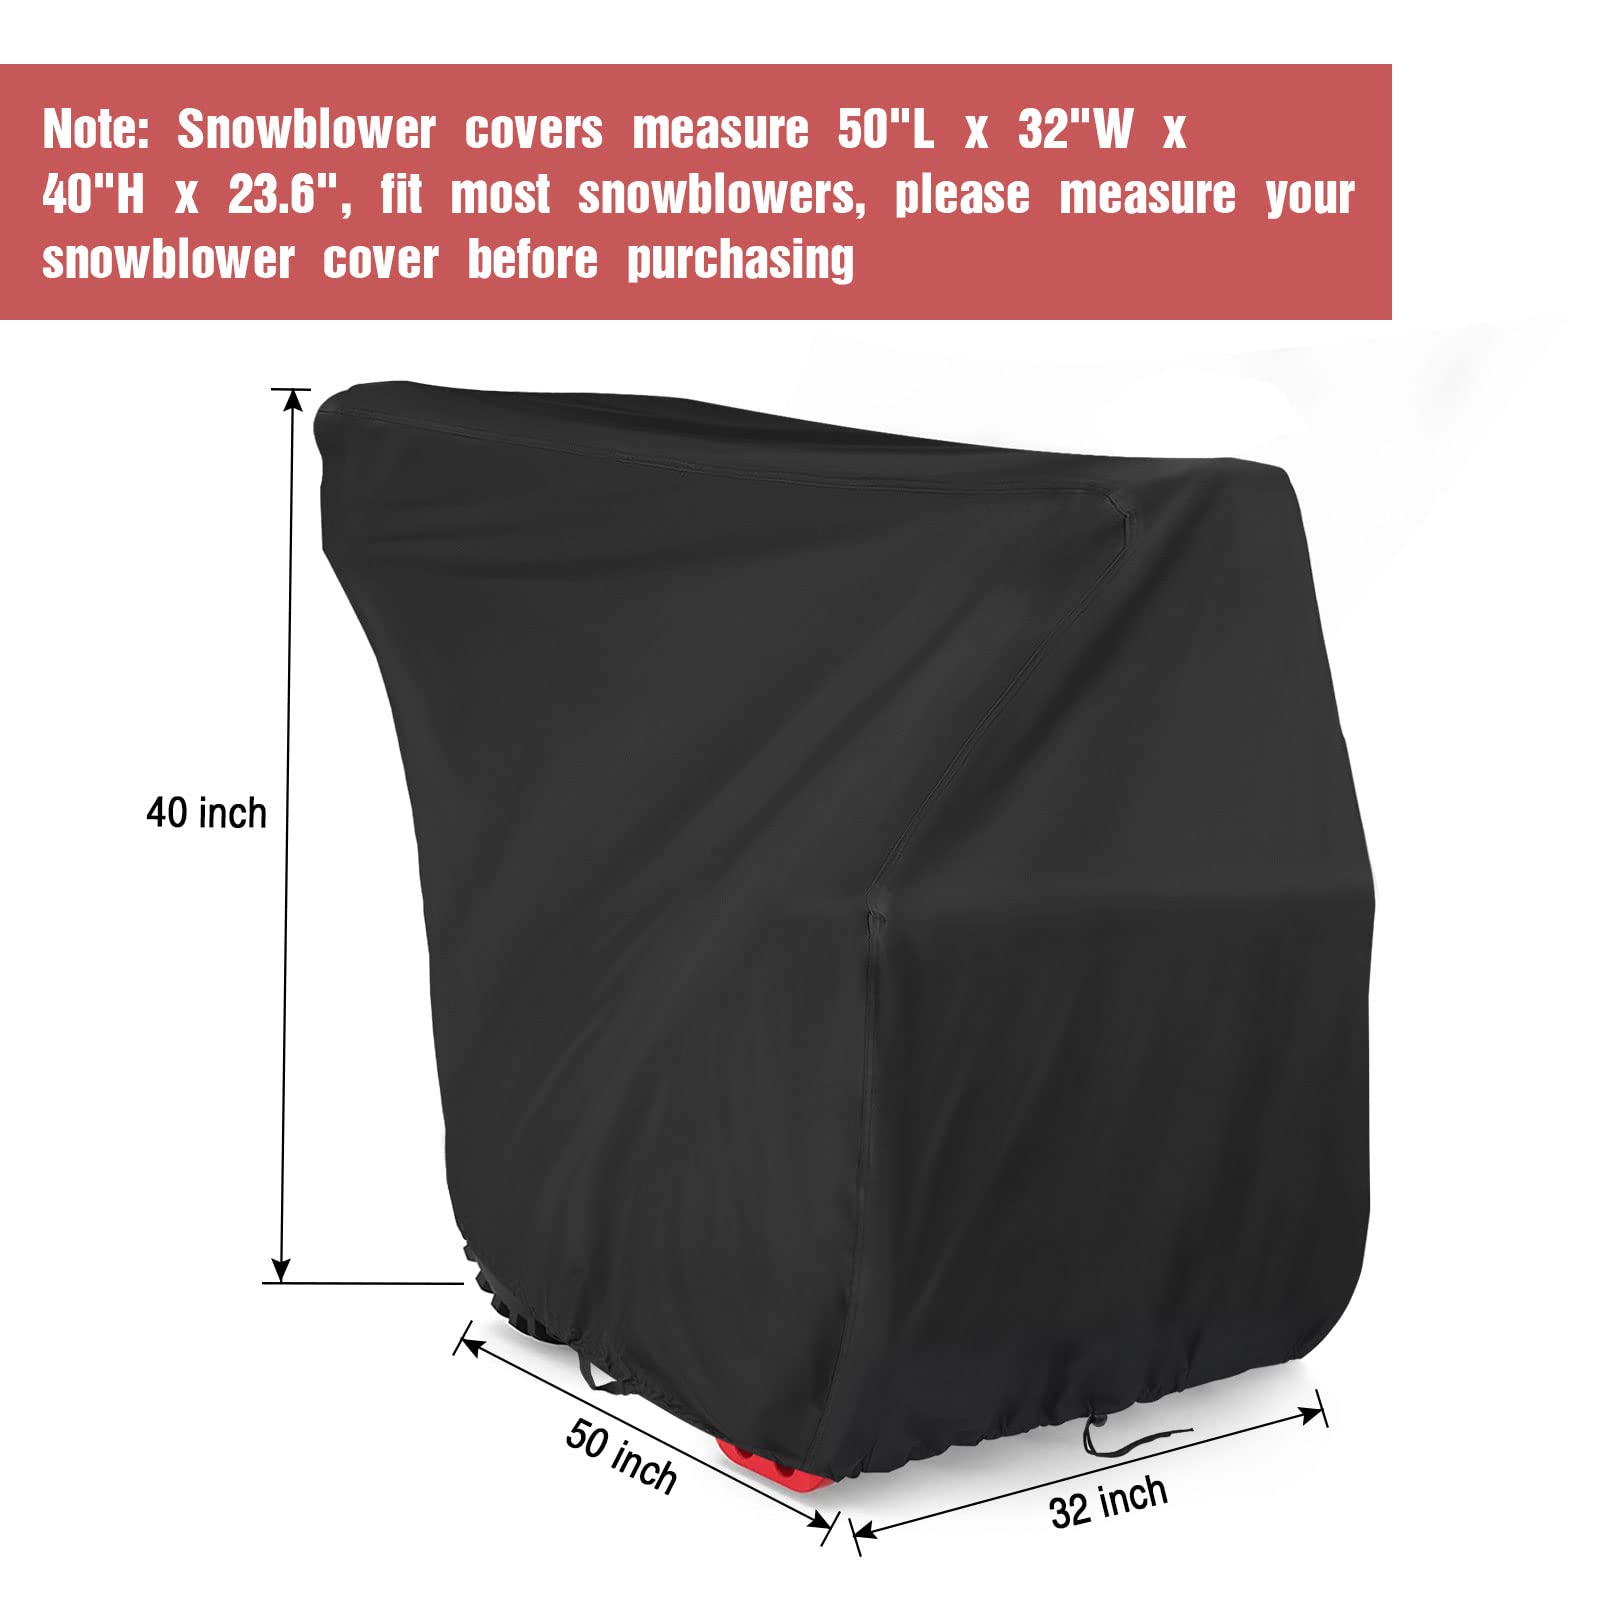 Kasla Snow Blower Covers,Waterproof Snow Blower Cover for Outside,Universal Heavy Duty Snowblower Cover-50"X32"X40"(LxWxH)